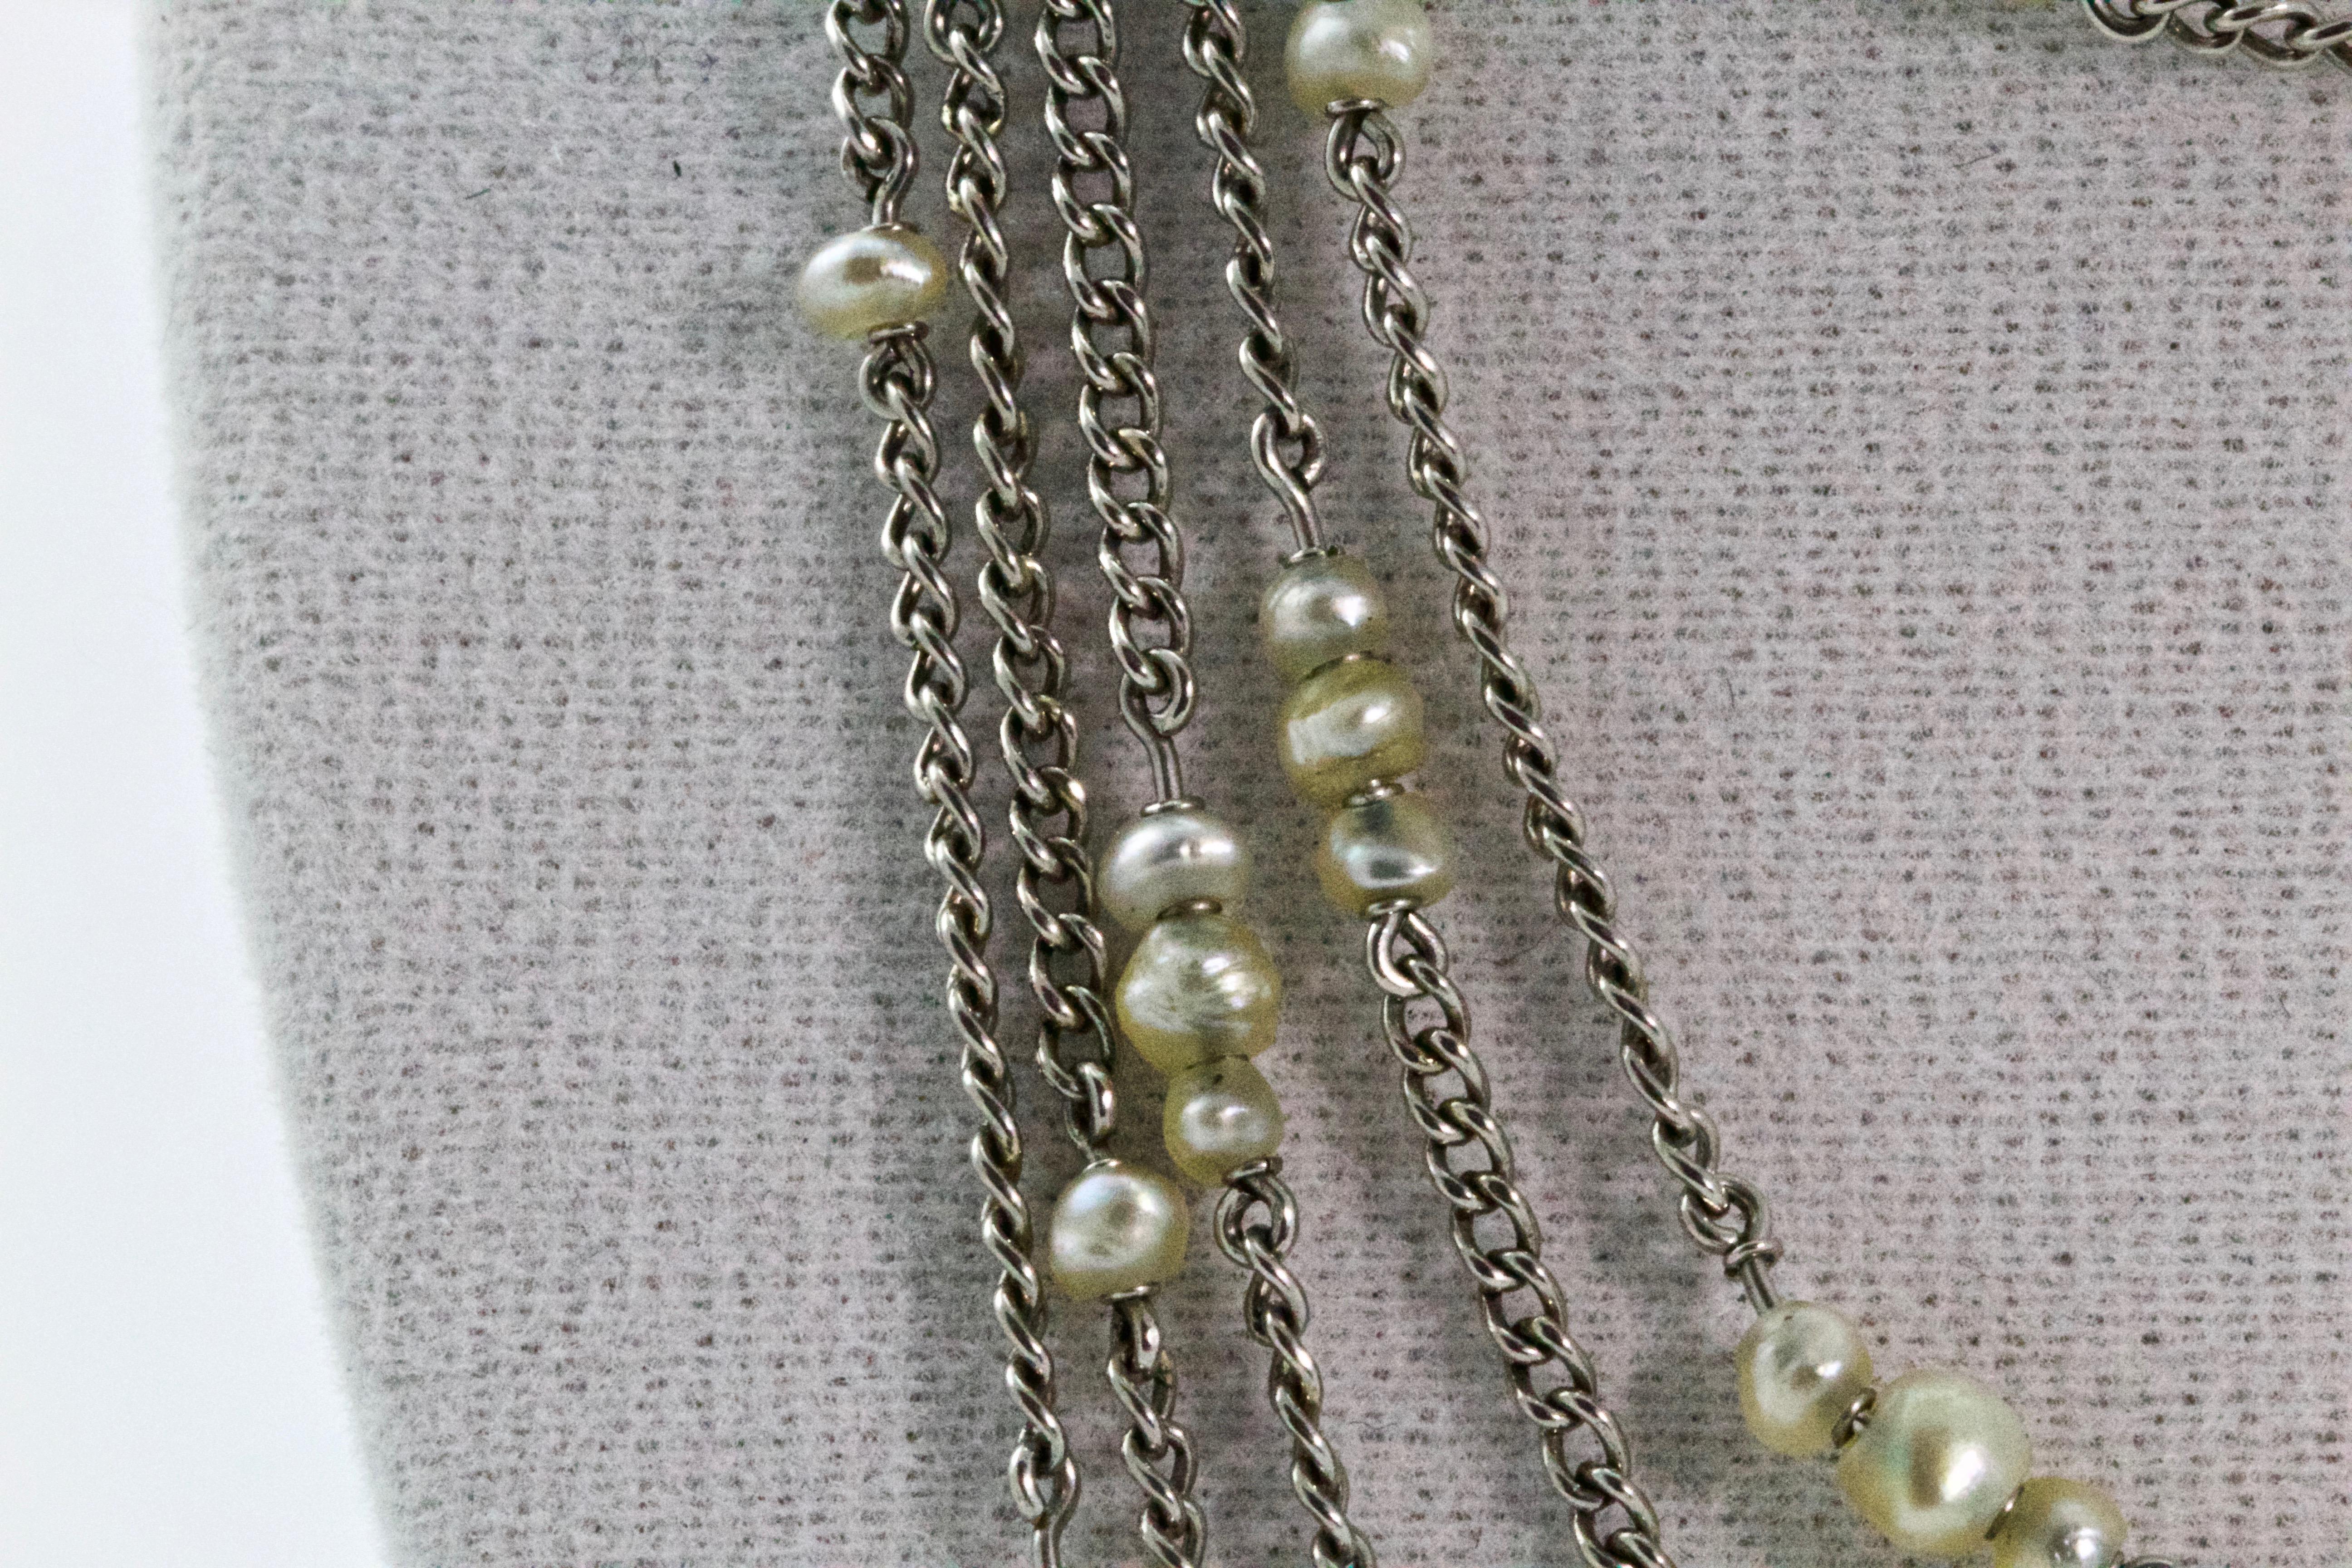 Fashioned circa 1920s this Art Deco long guard chain is comprised of platinum cable style links to give a chain of approximately 72 inches long. Beautifully embellished with 124 natural pearls. A lovely antique necklace that can be worn in many